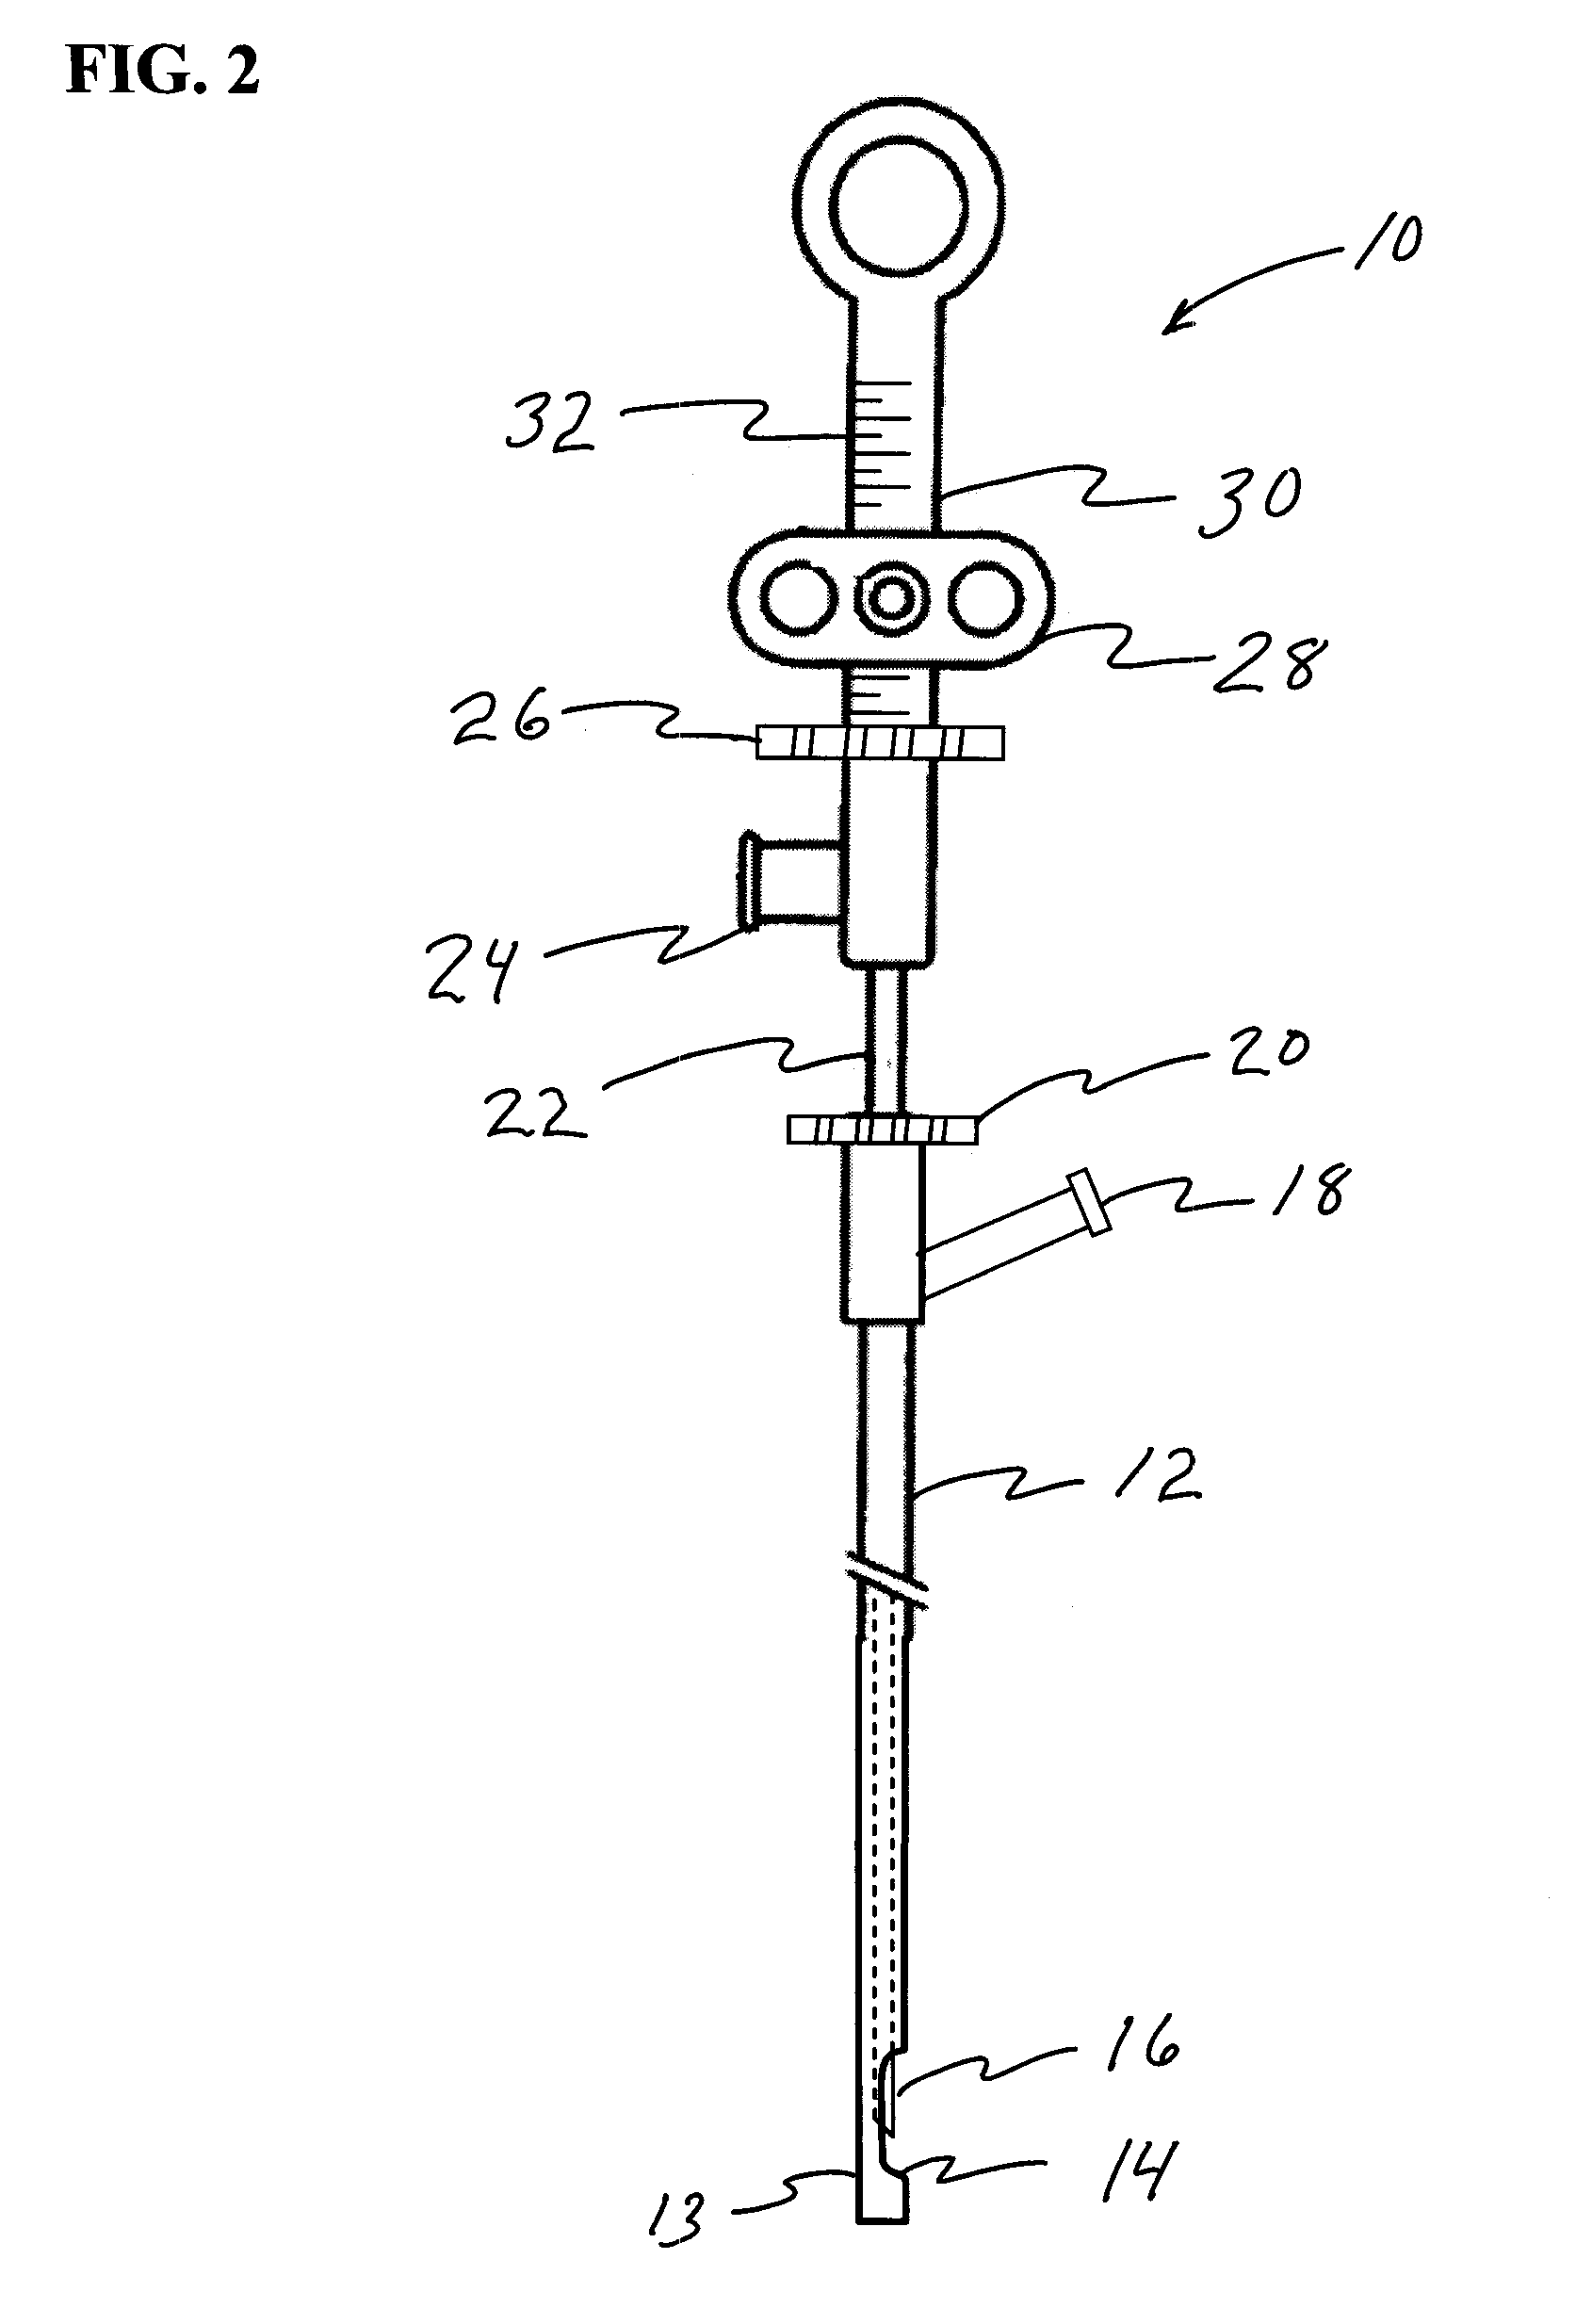 Methods and Systems for Submucosal Implantation of a Device for Diagnosis and Treatment of a Body